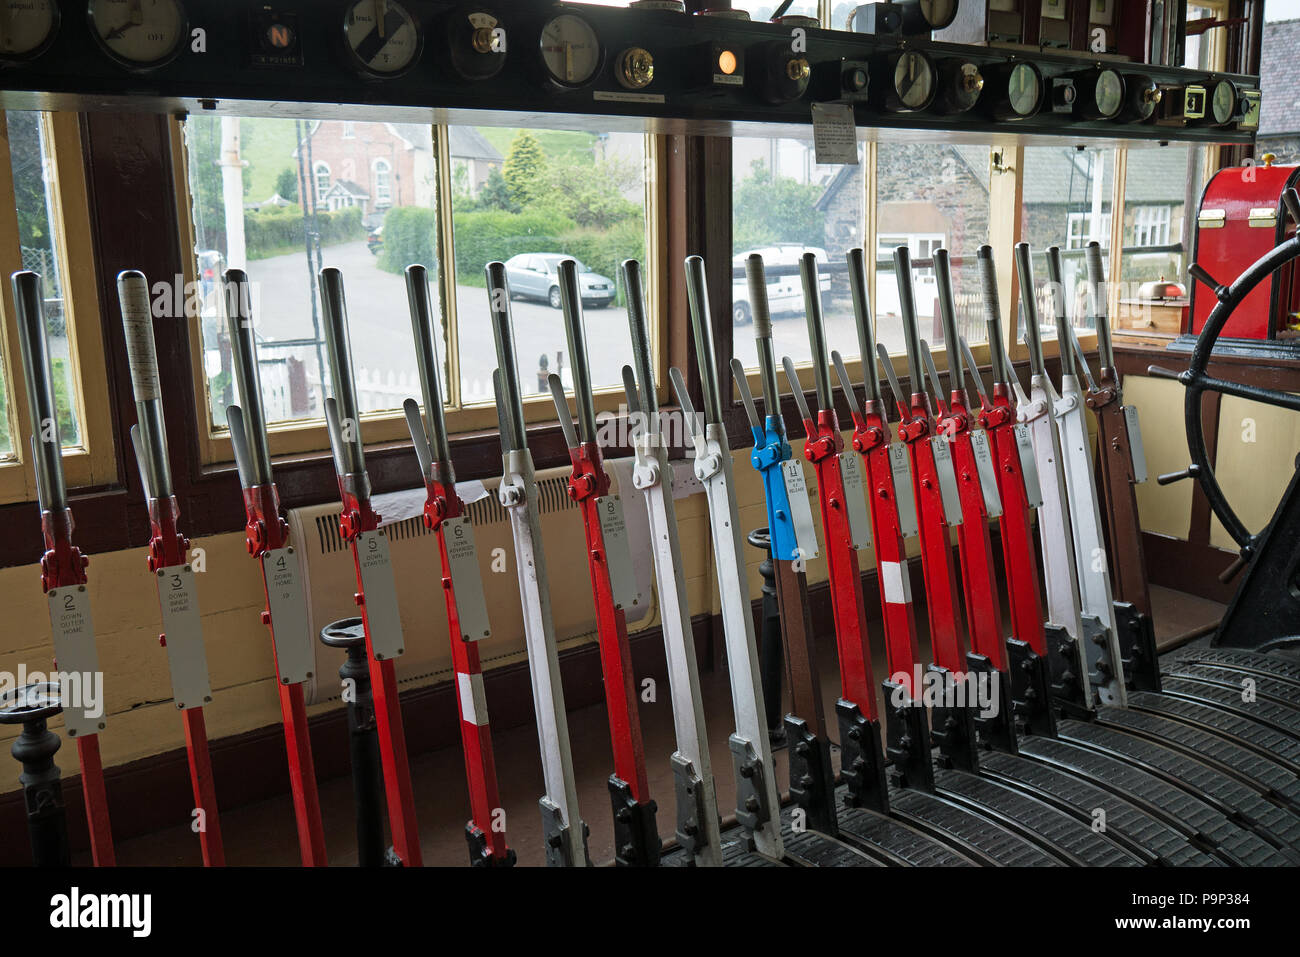 Rail-way signal-box control point with it's colourfull levers. June 09 2016 - Glyndyfrdwy Railway Station, Wales, UK. Stock Photo